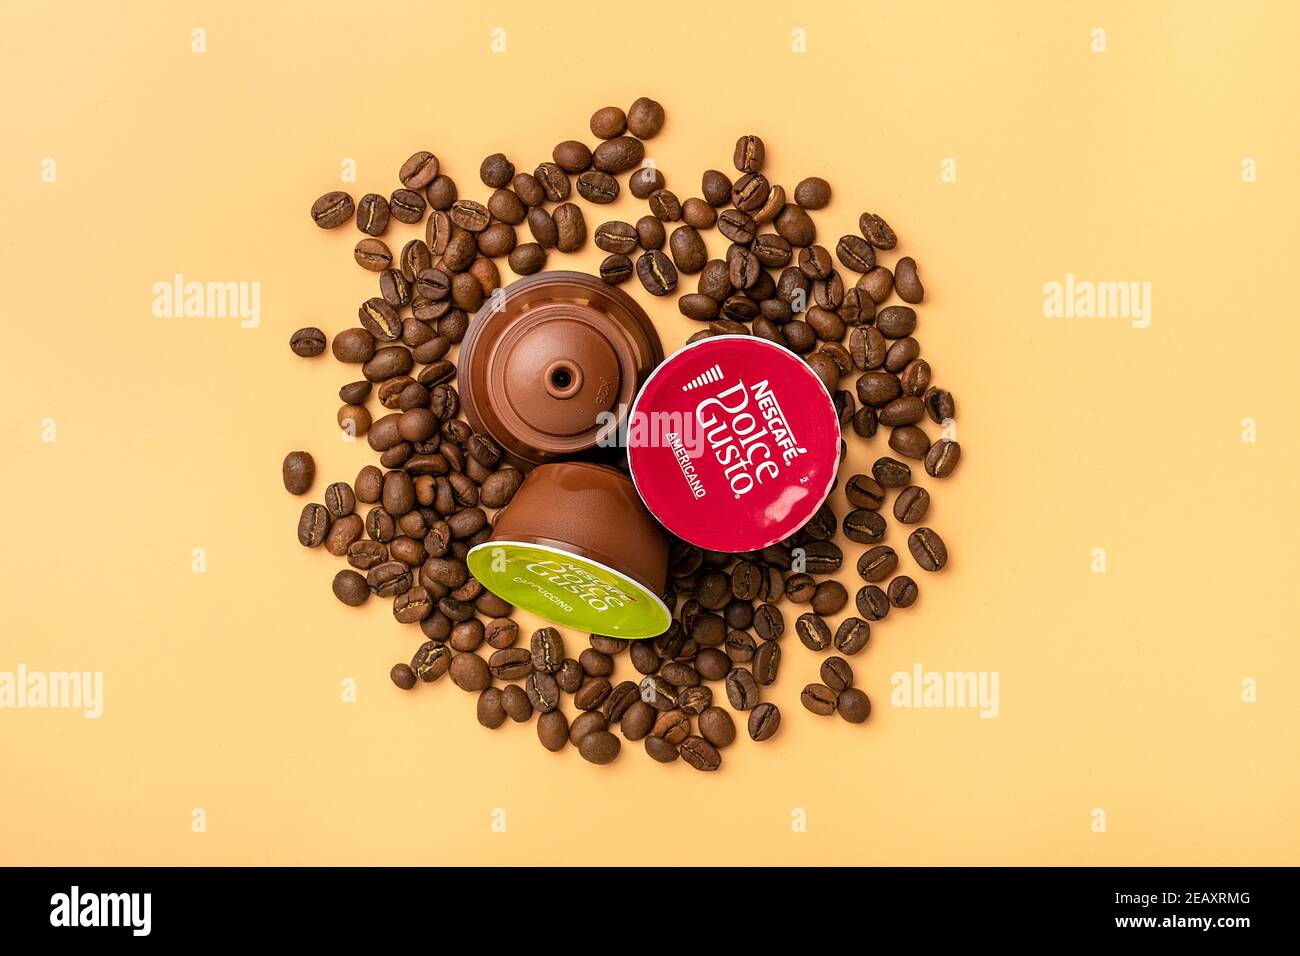 January 2021,Milan, Italy Set of Nescafe Dolce Gusto coffee capsules isolated on white background Top view Flat lay Drink obtained from dosed capsule Stock Photo